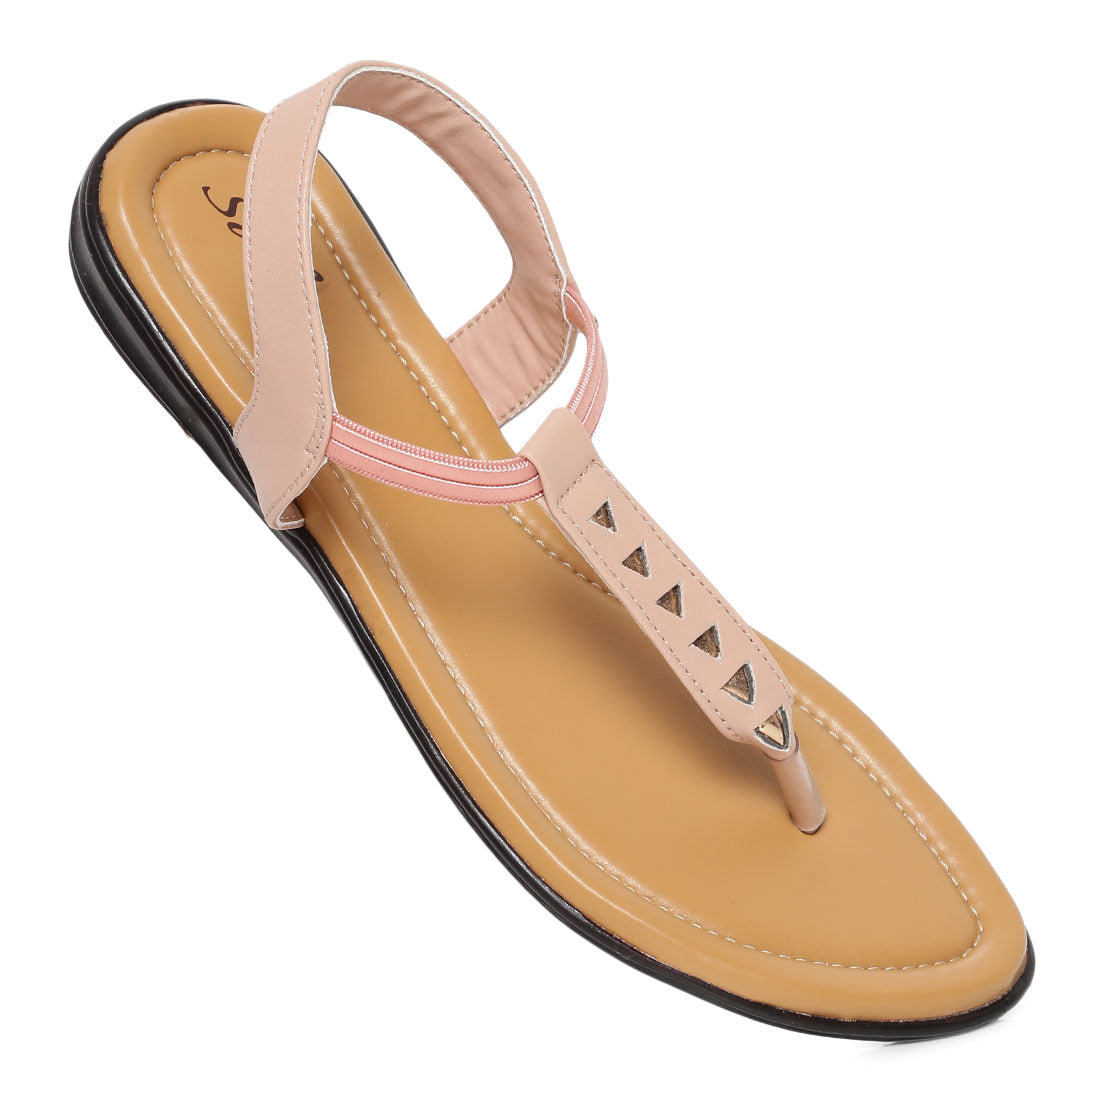 Paragon  K6009L Women Sandals | Casual &amp; Formal Sandals | Stylish, Comfortable &amp; Durable | For Daily &amp; Occasion Wear